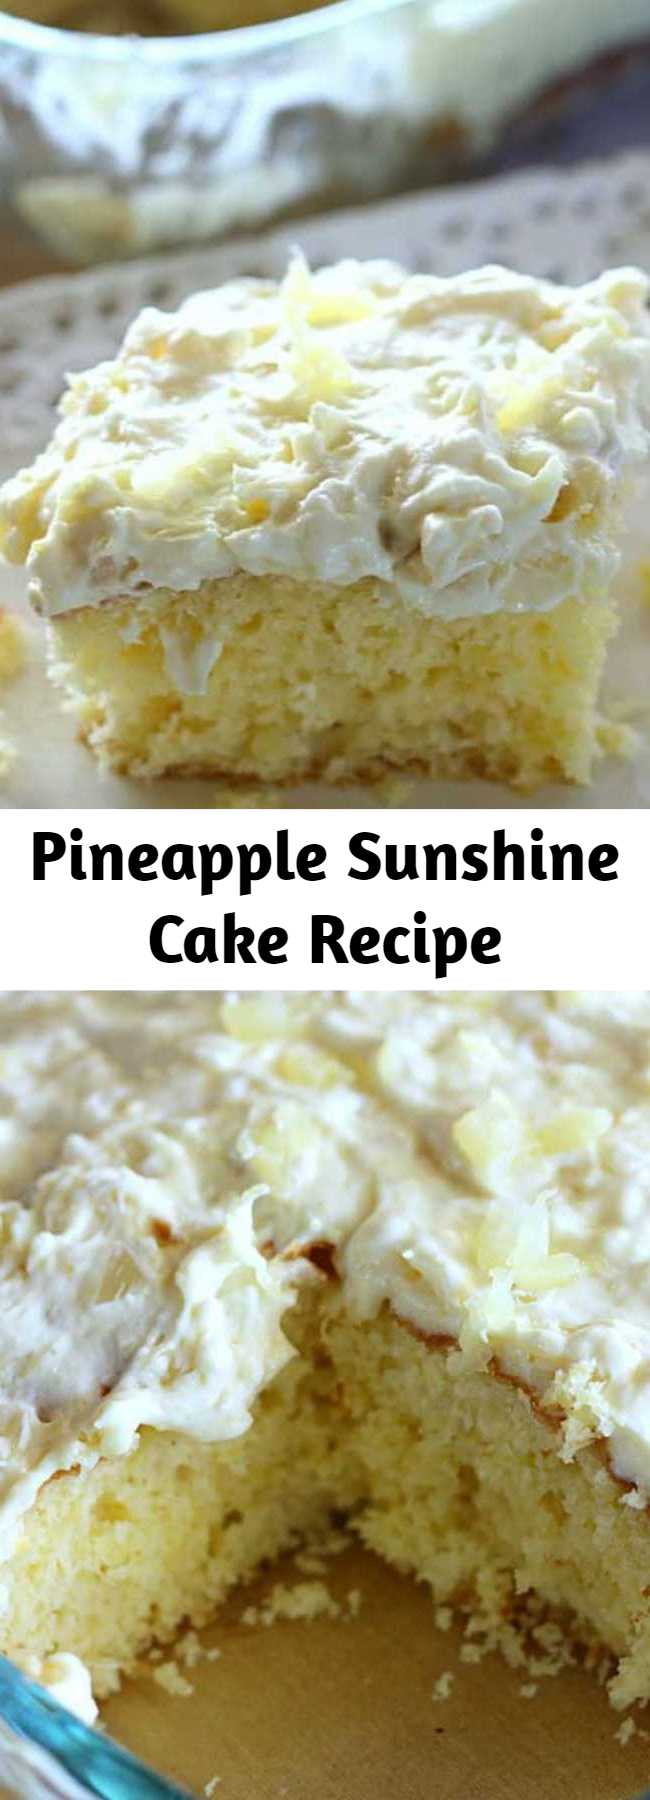 Pineapple Sunshine Cake Recipe - A light and fluffy pineapple-infused cake, topped with a sweet and creamy whipped cream frosting. This cake is always a crowd pleaser!